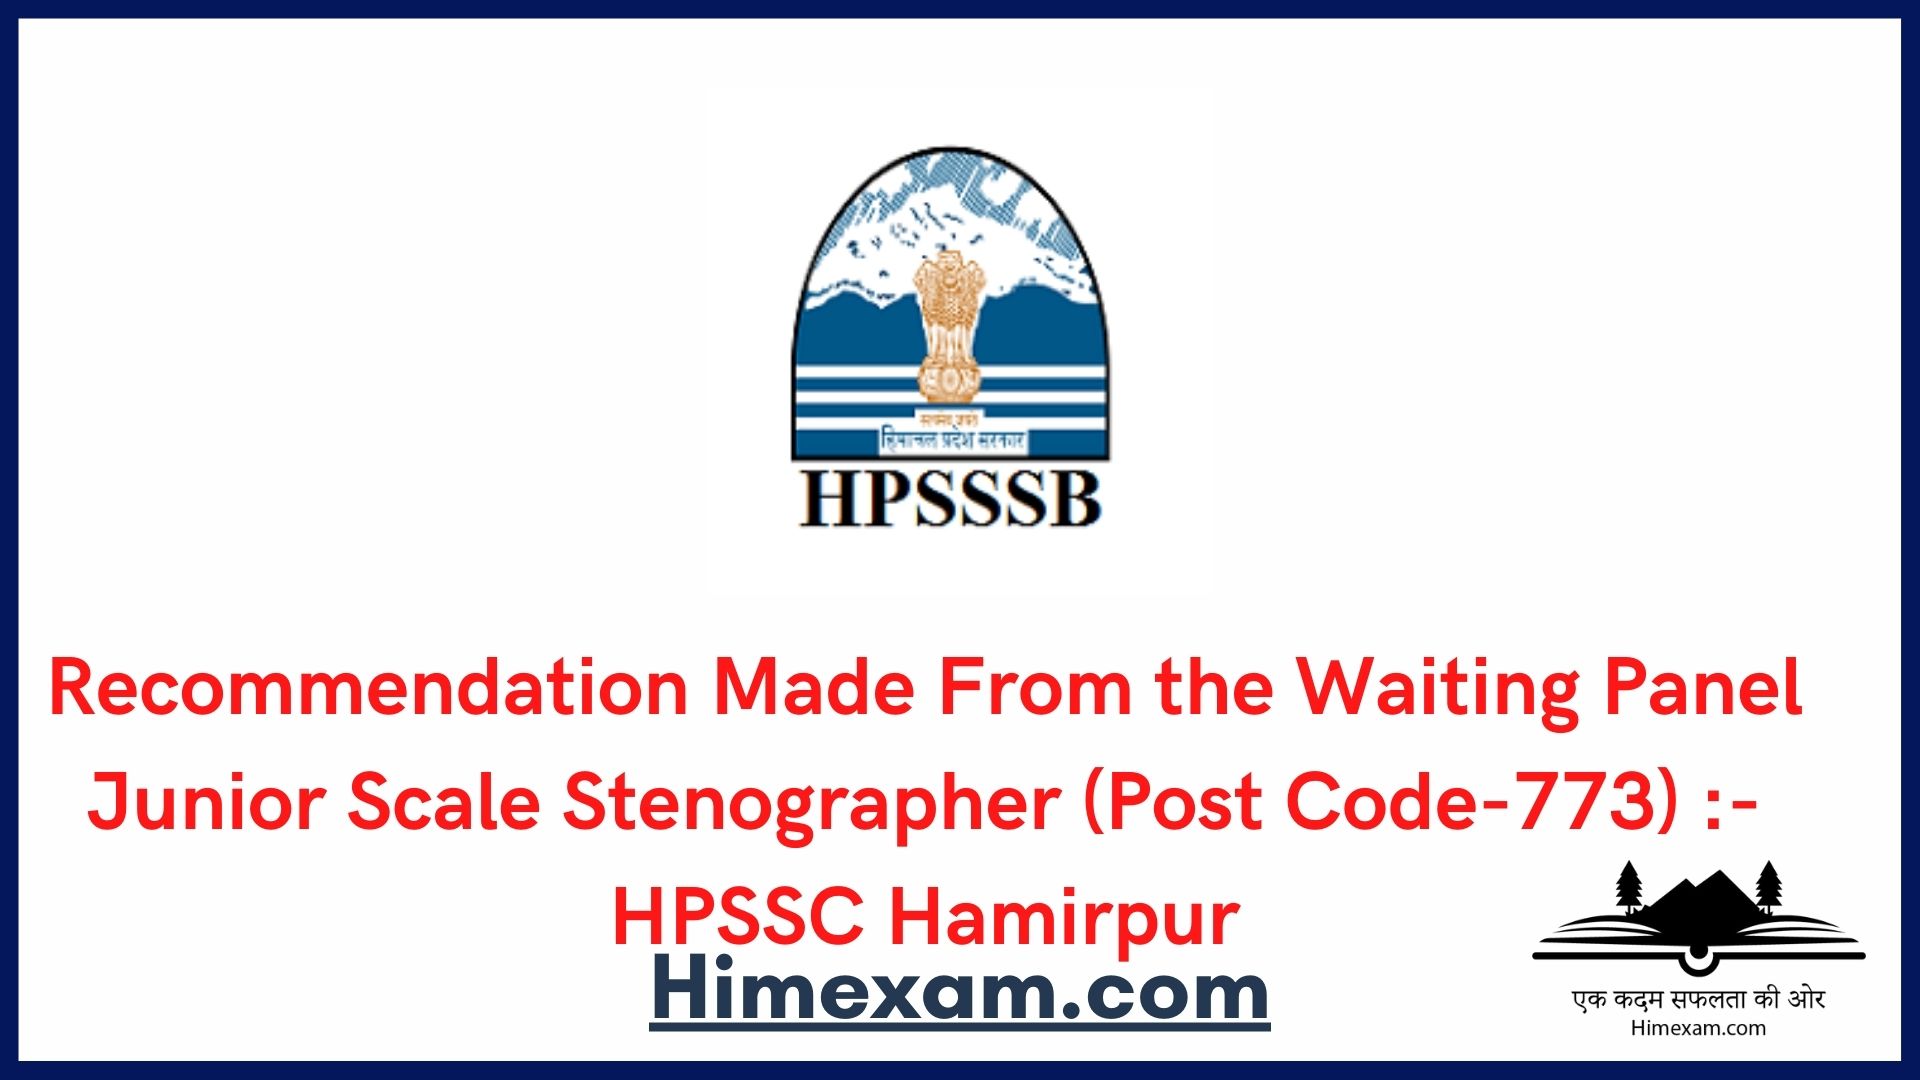 Recommendation Made From the Waiting Panel Junior Scale Stenographer (Post Code-773) :- HPSSC Hamirpur